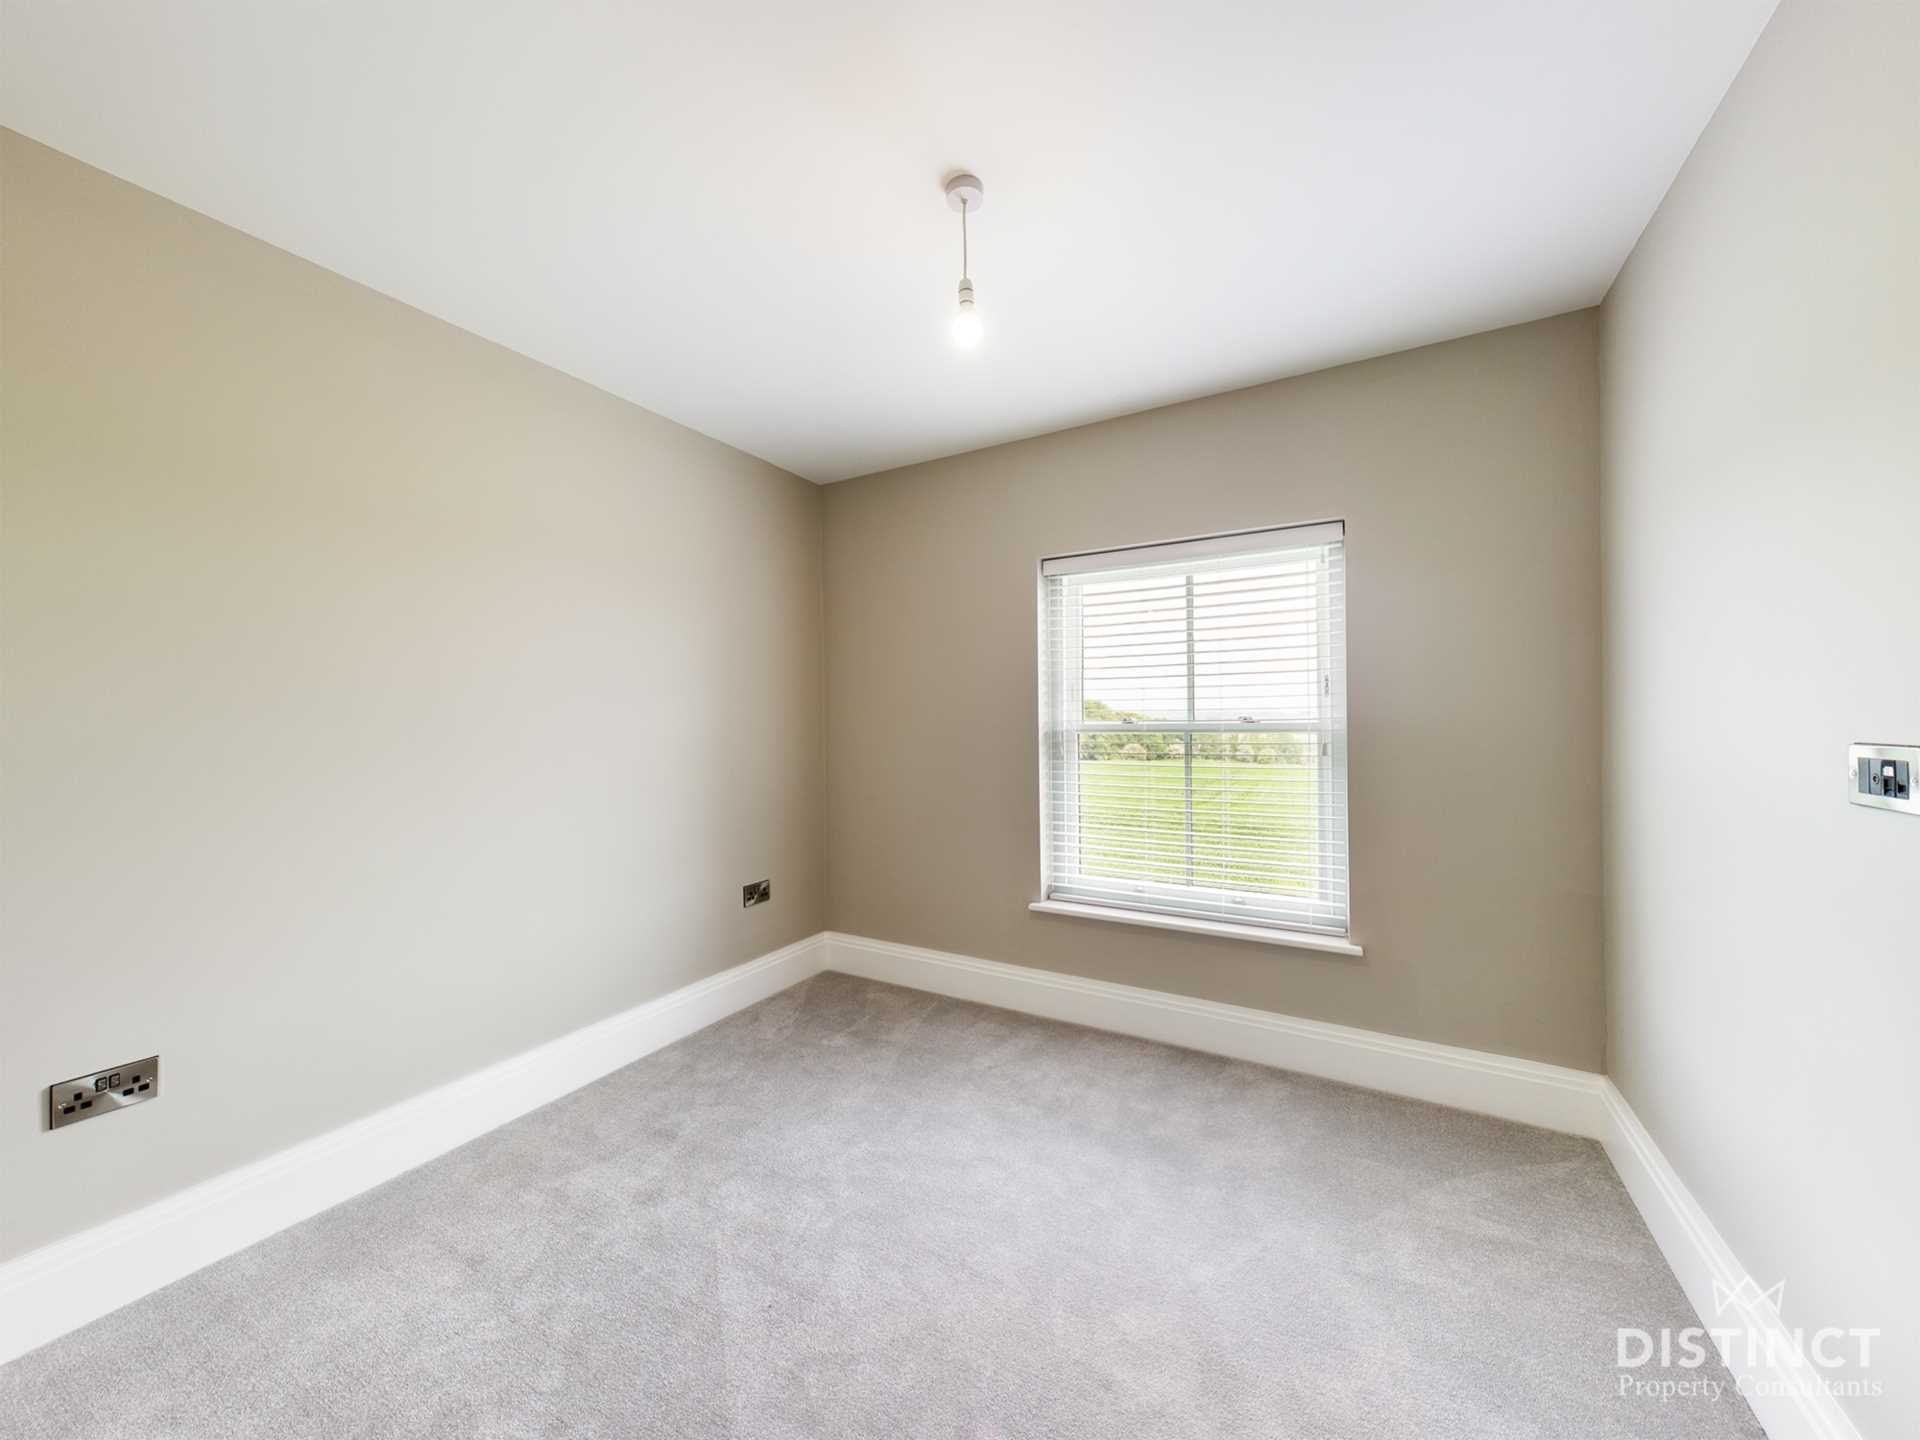 Flat 9 Riverview, 11 Windrush Heights, Near Burford, Image 6